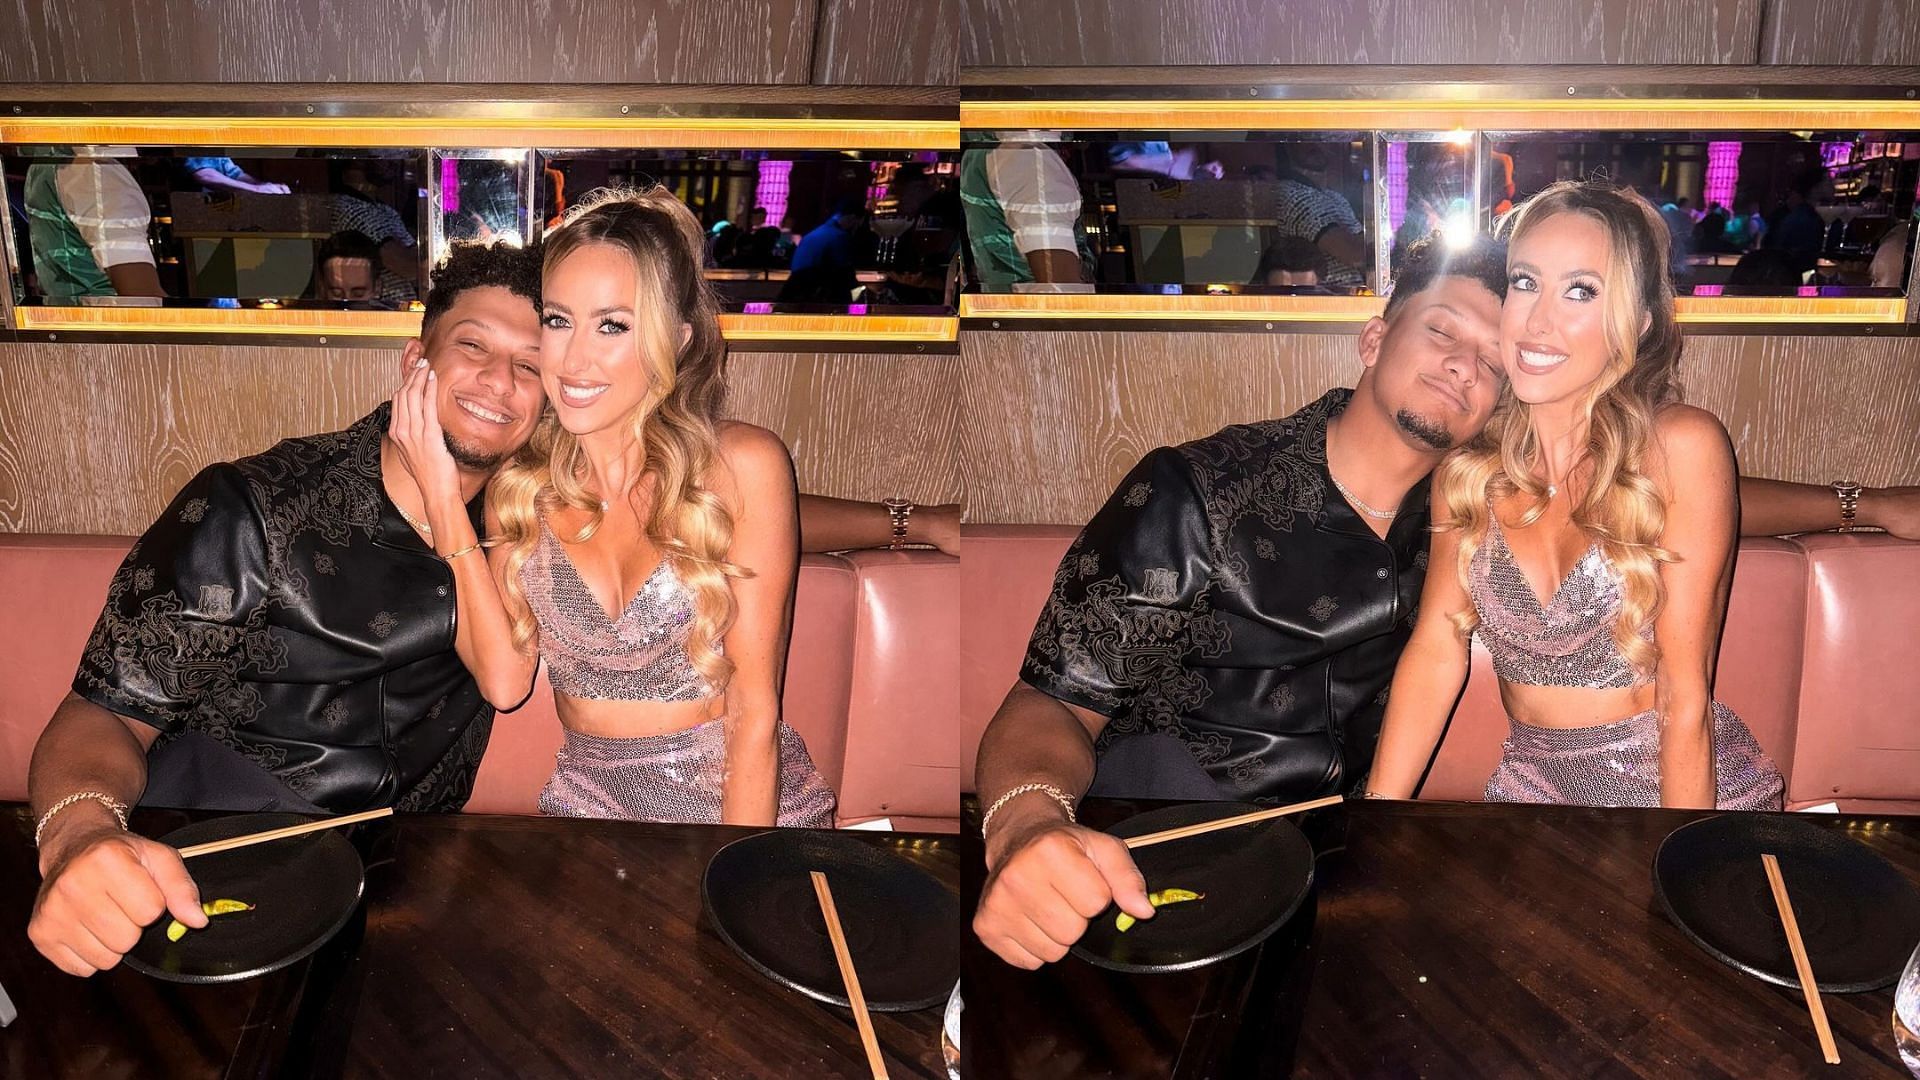 Patrick Mahomes and his wife Brittany spending the weekend in Miami